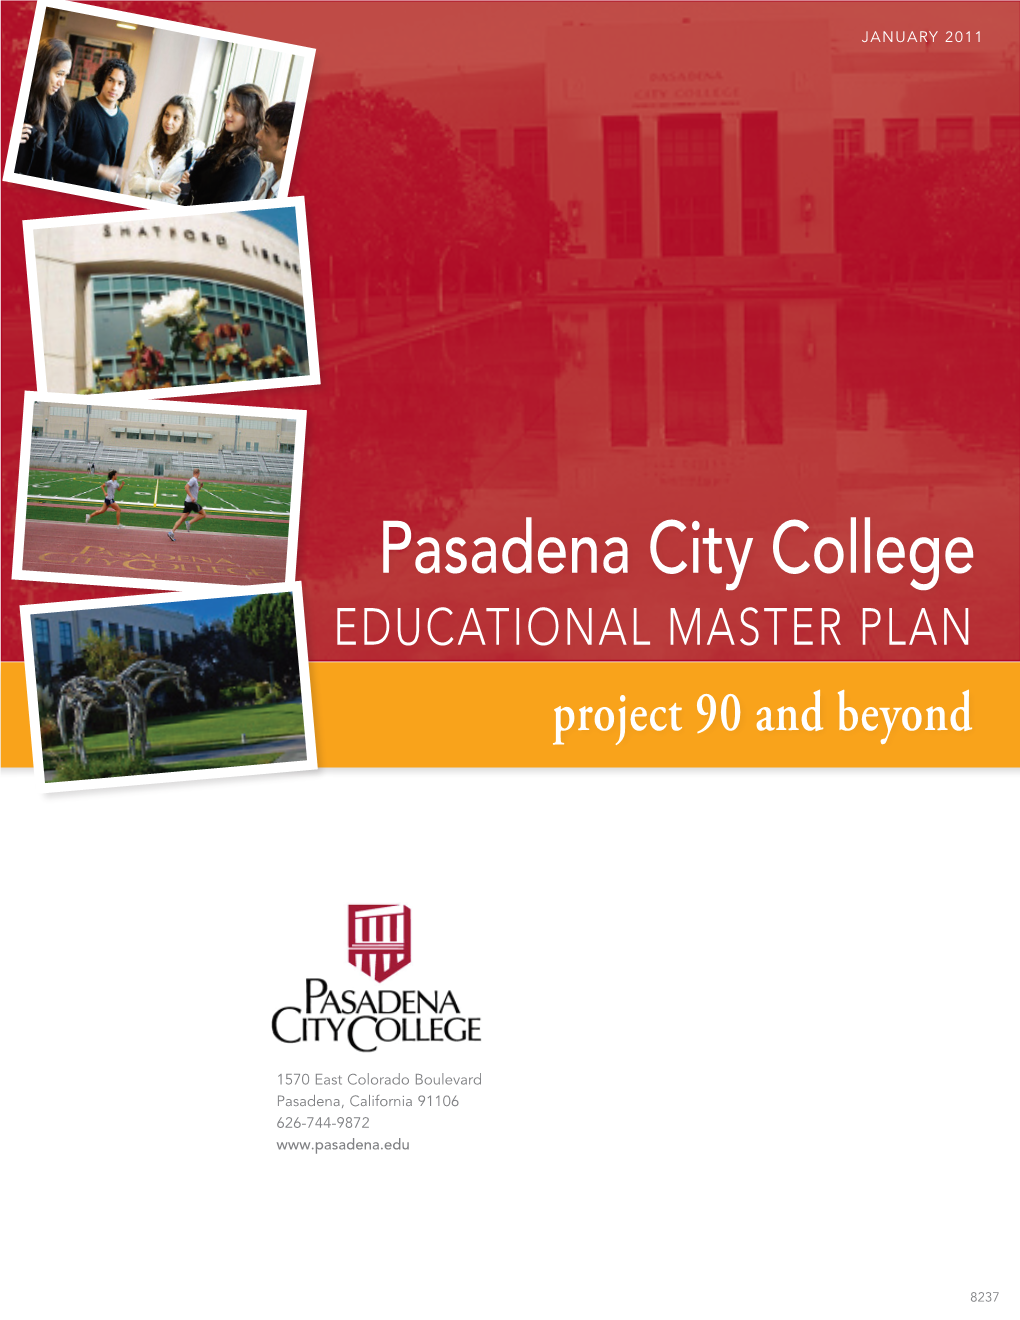 Educational Master Plan Project 90 and Beyond